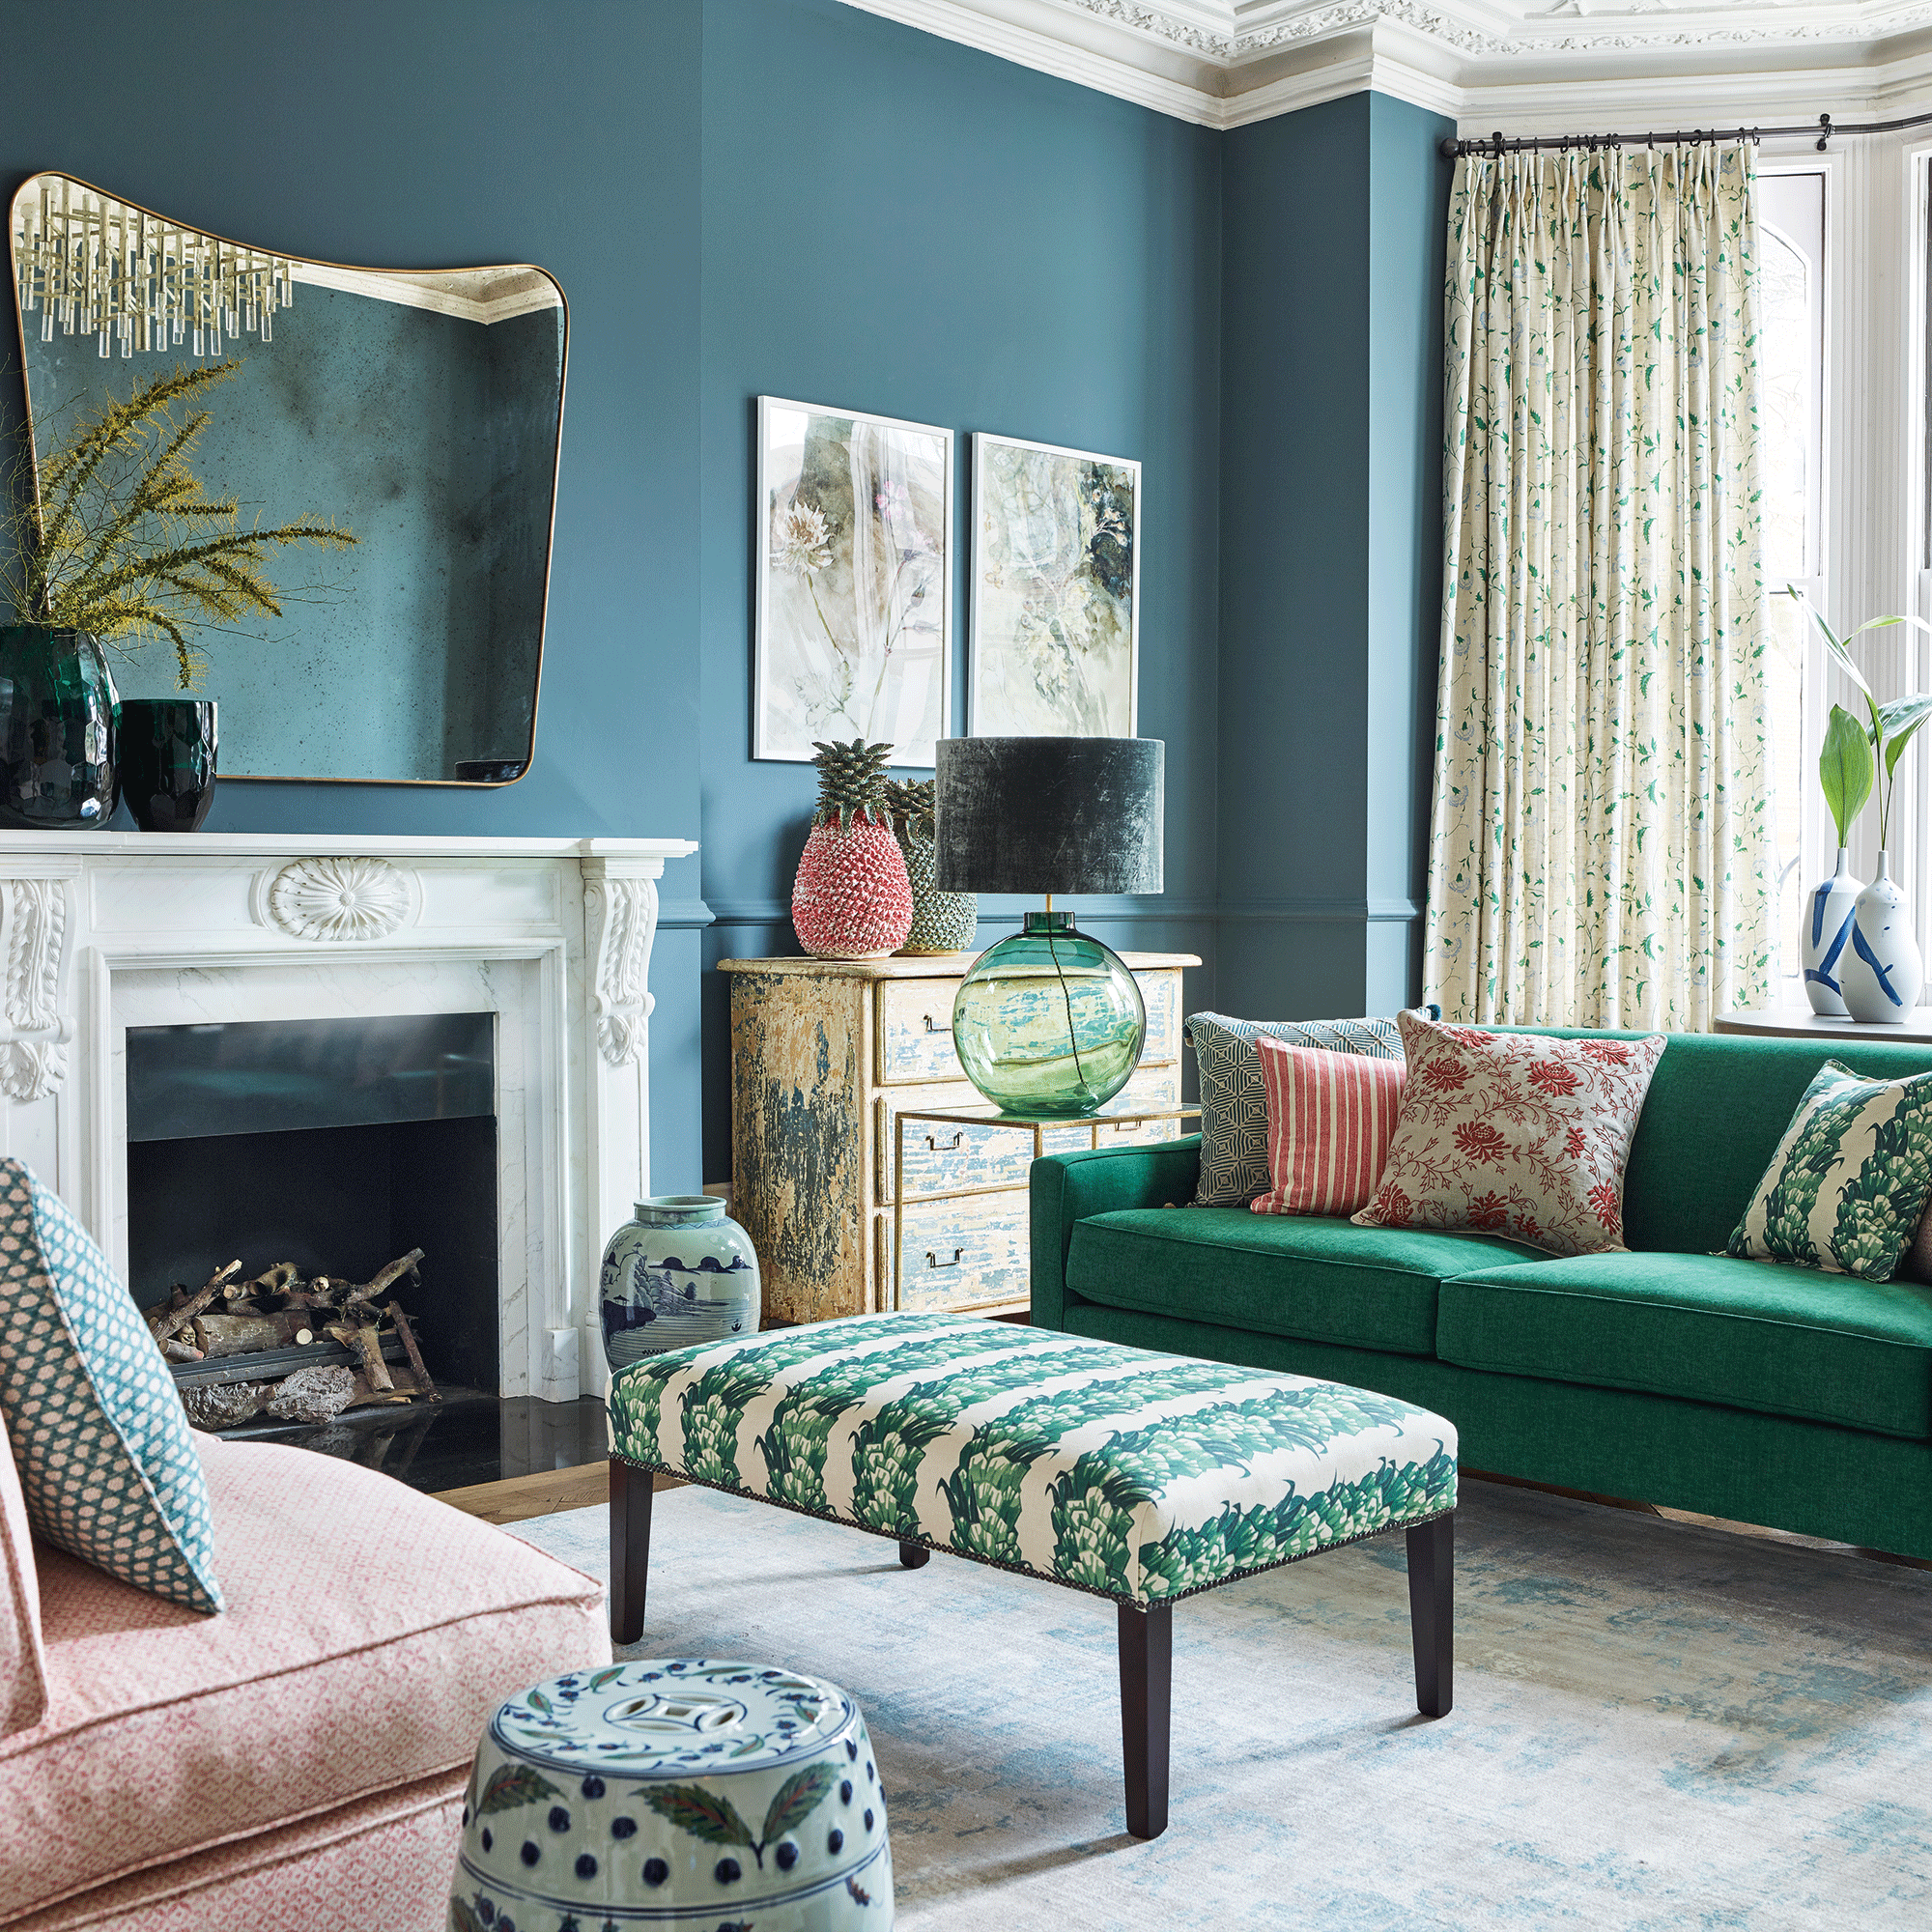 Blue living room with patterned curtains